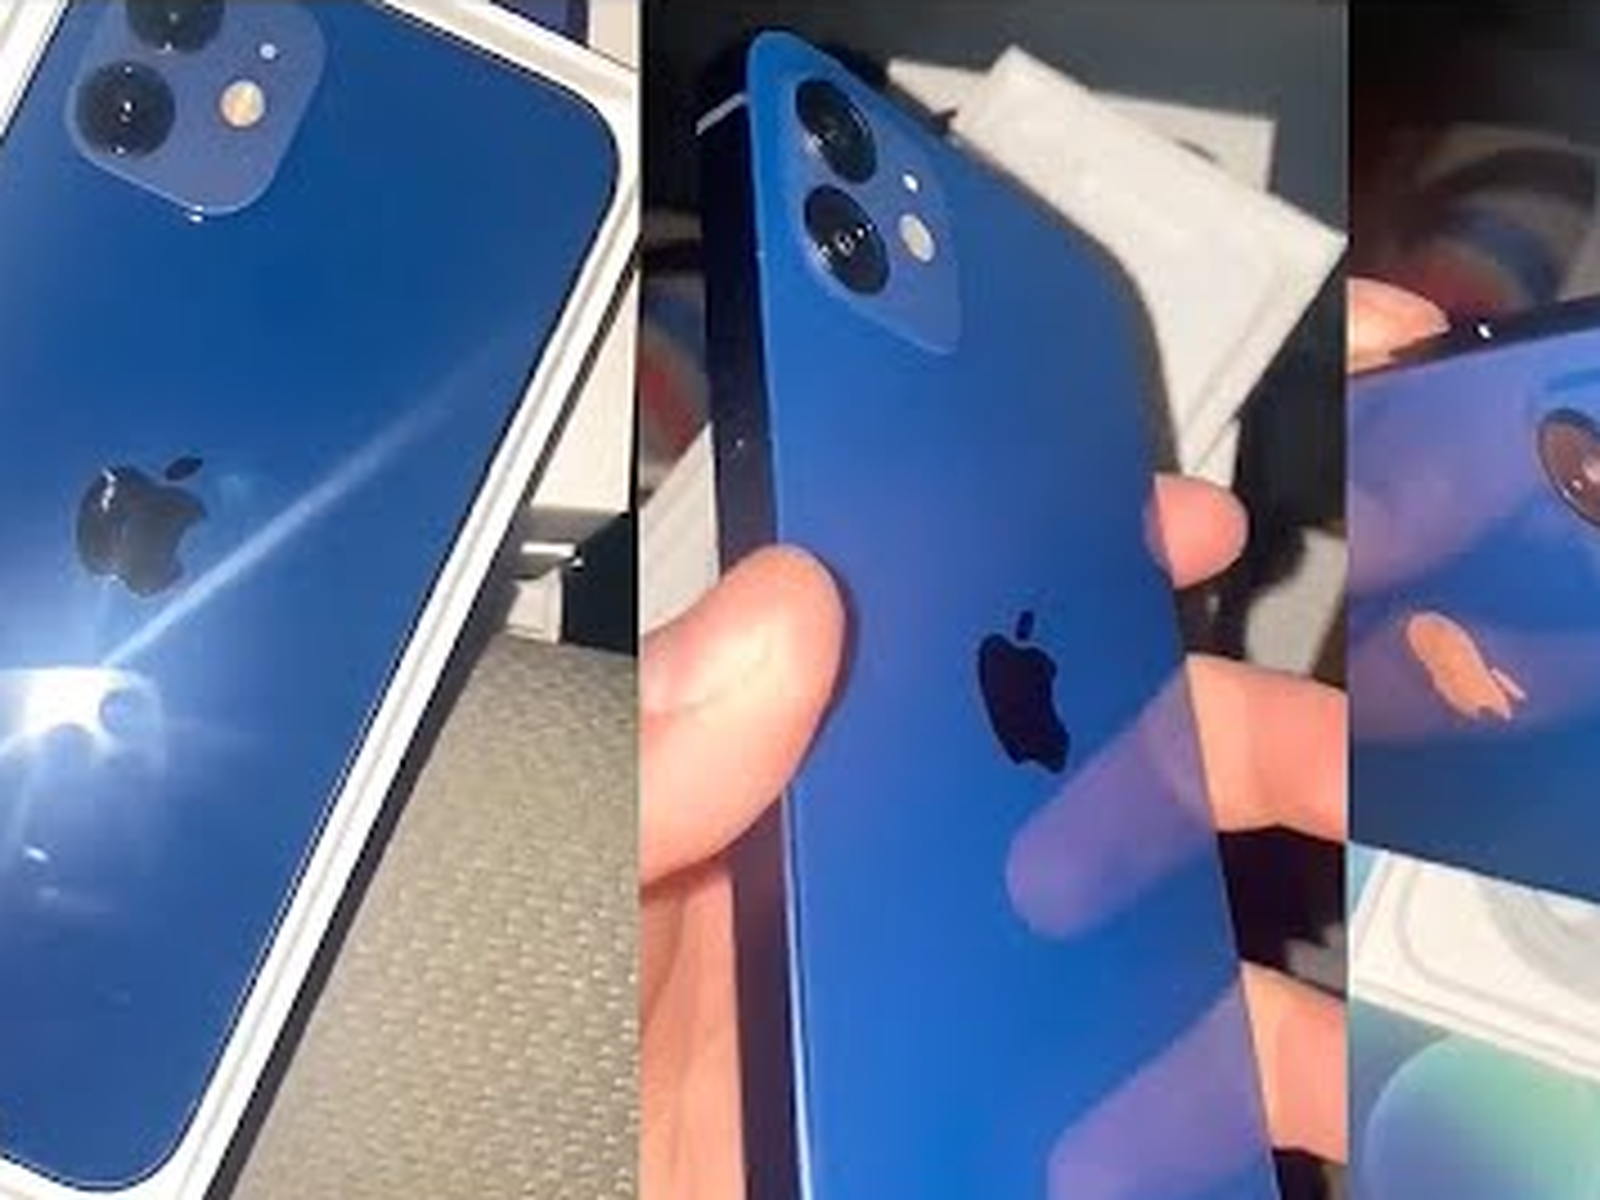 Iphone 12 Pro In Graphite And Iphone 12 In Blue Shown Off In Unboxing Videos Macrumors